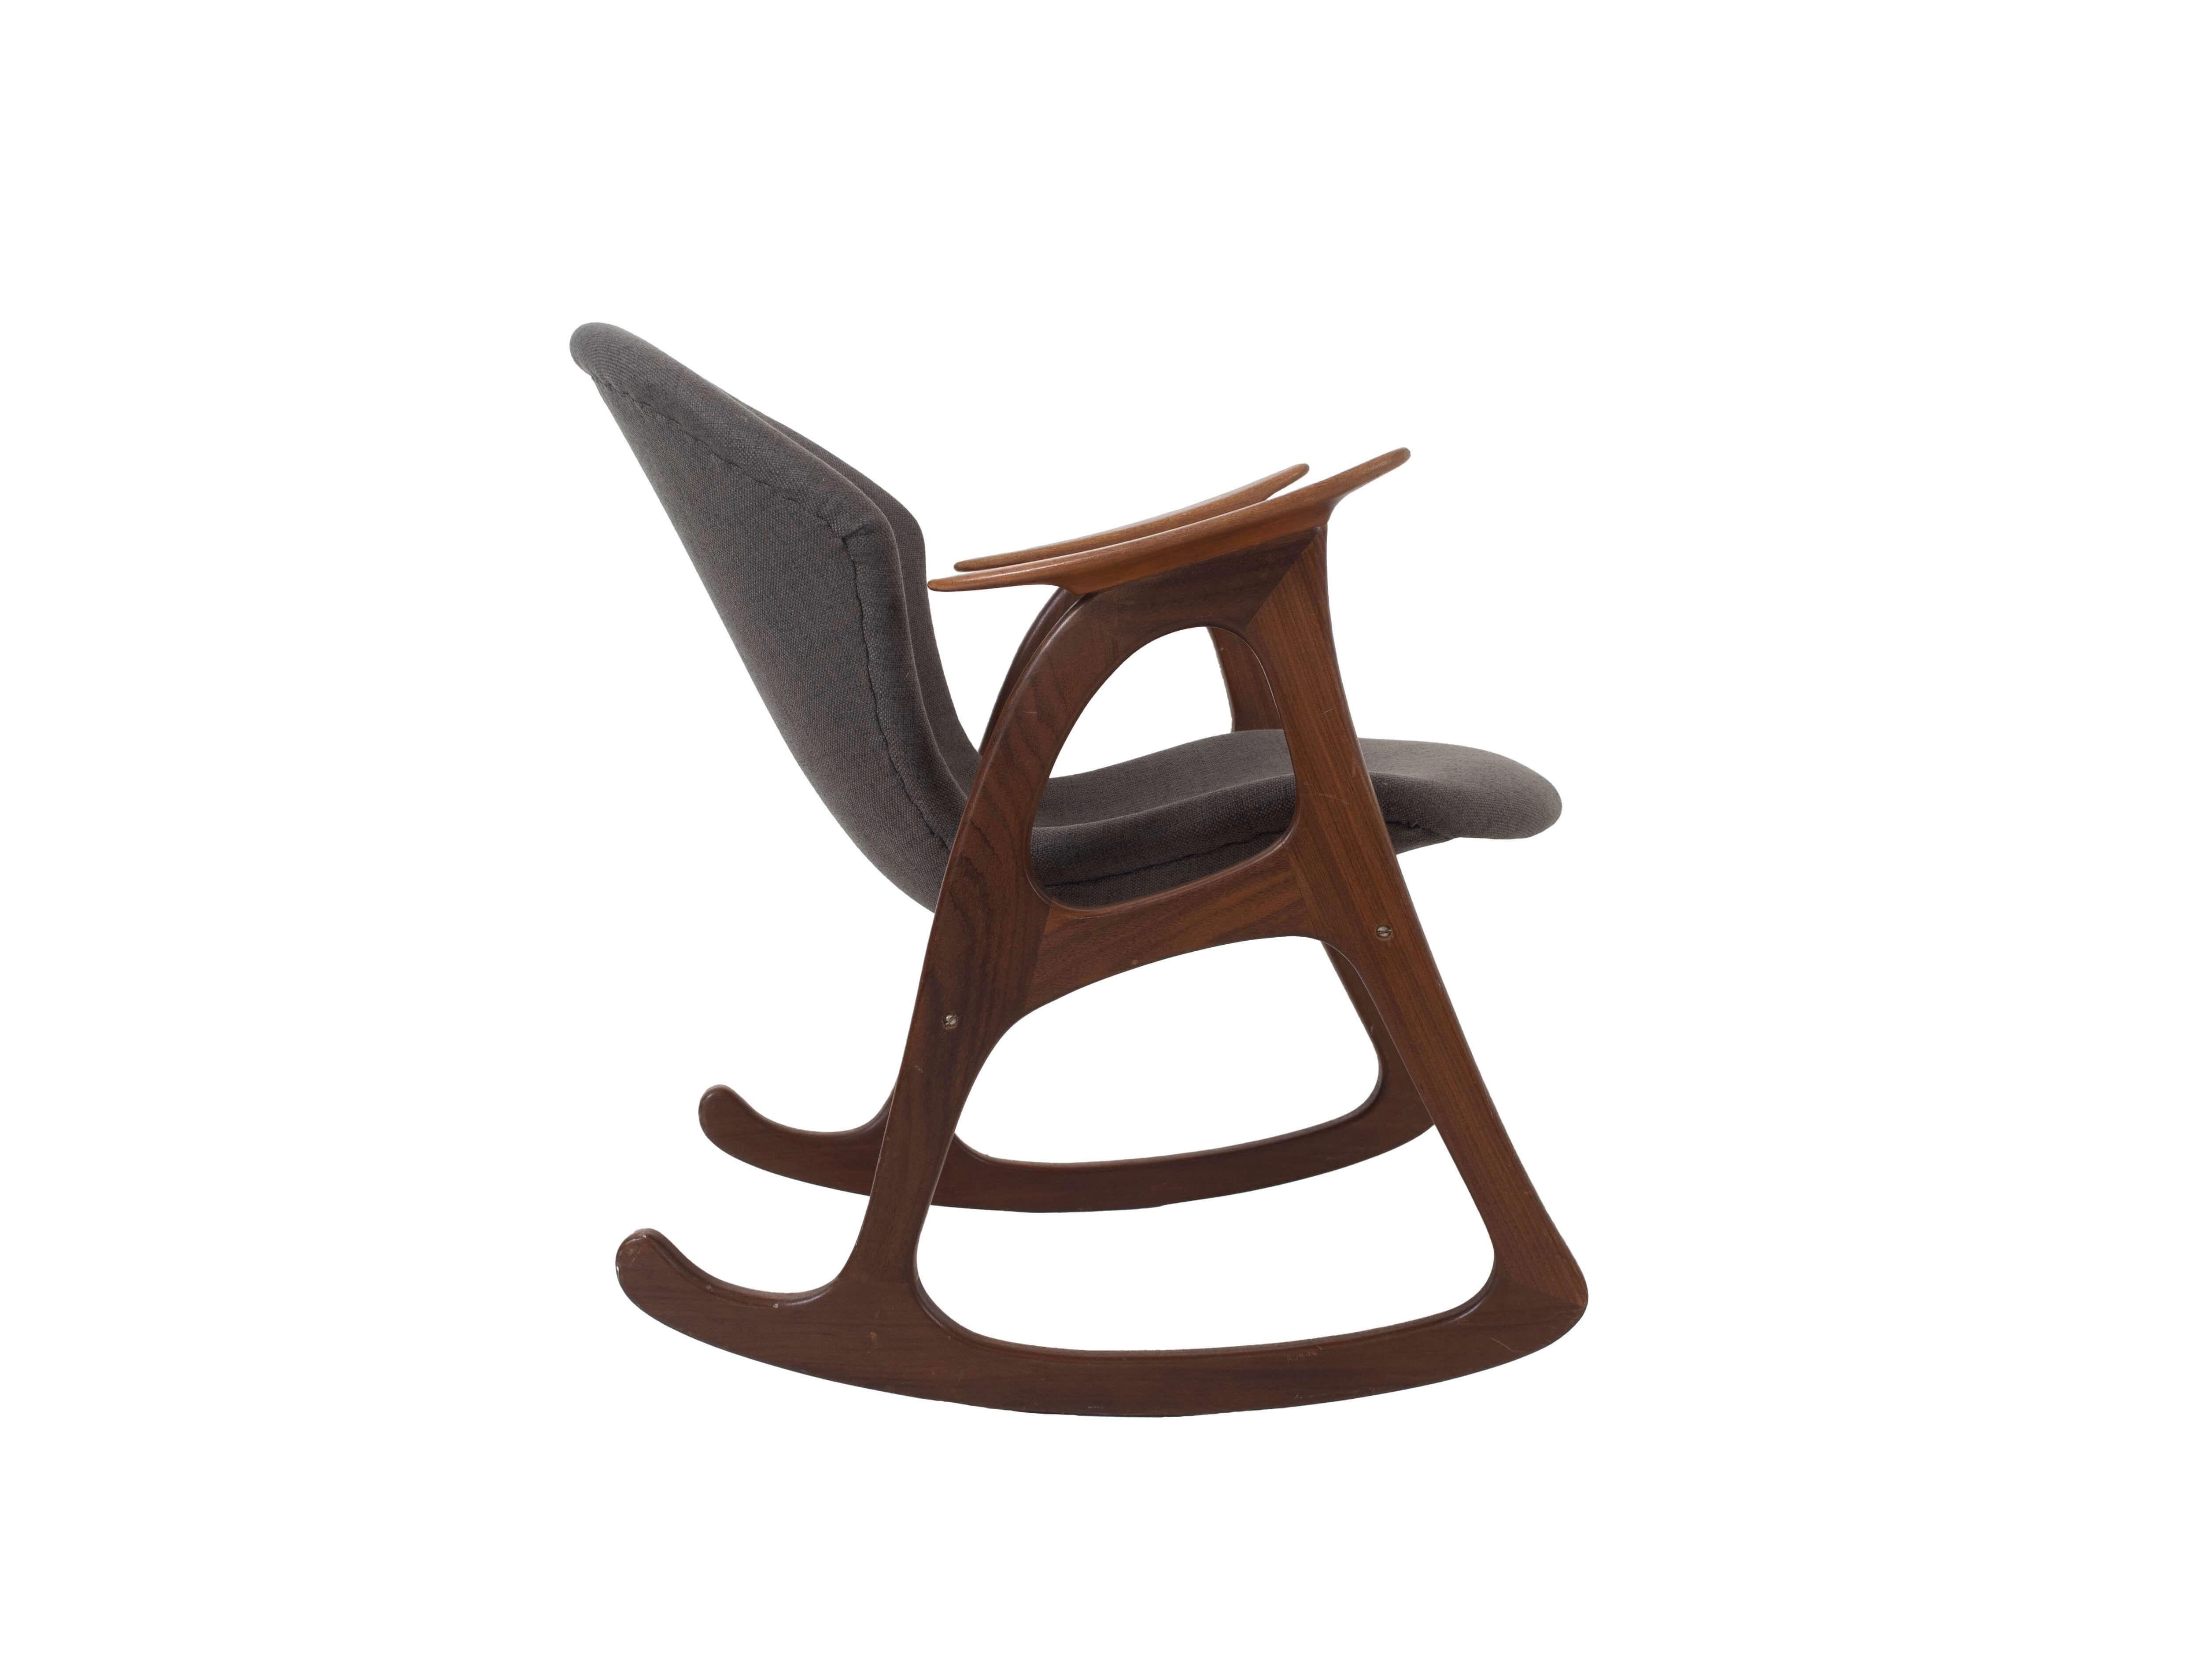 Very decorative Danish vintage rocking chair by Aage Christiansen for Erhardsen & Andersen, Denmark 1960s. This chair is made of teak wood, which contrasts nicely with the fabric. It has the typical Scandinavian design features from the 1950s and